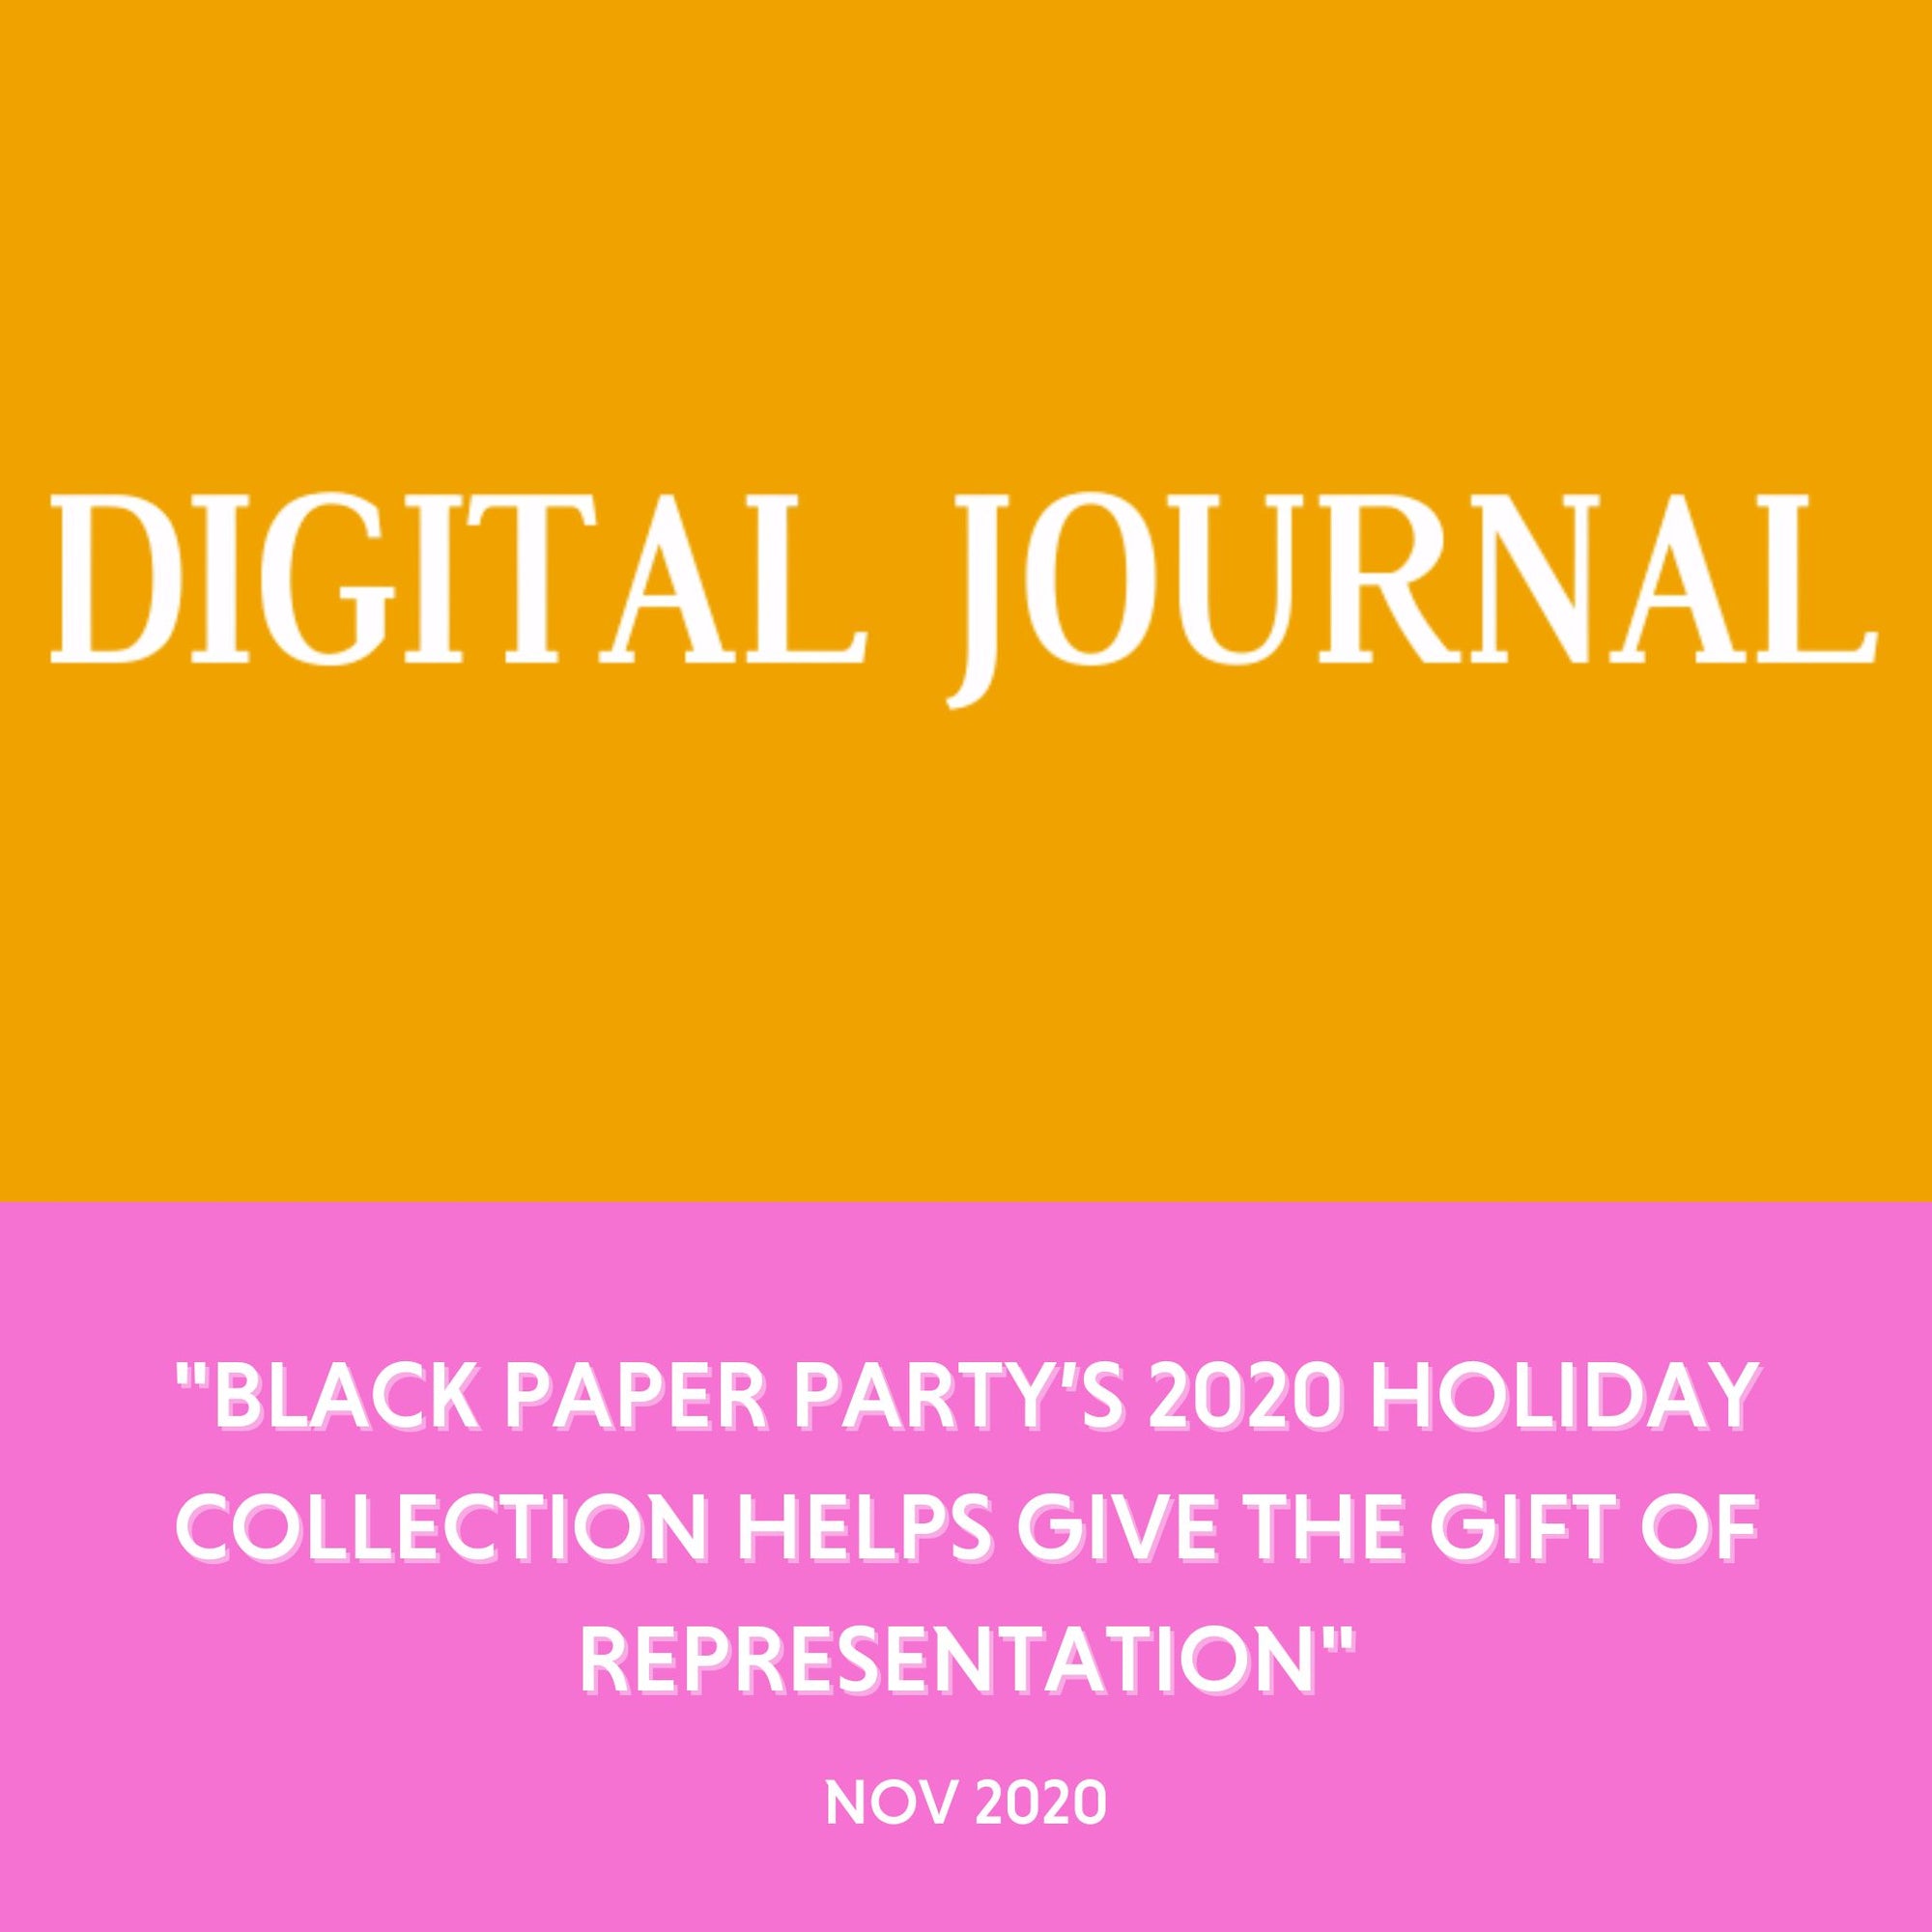 Digital Journal - "Black Paper Party’s 2020 Holiday Collection Helps Give The Gift Of Representation" - Nov 2020